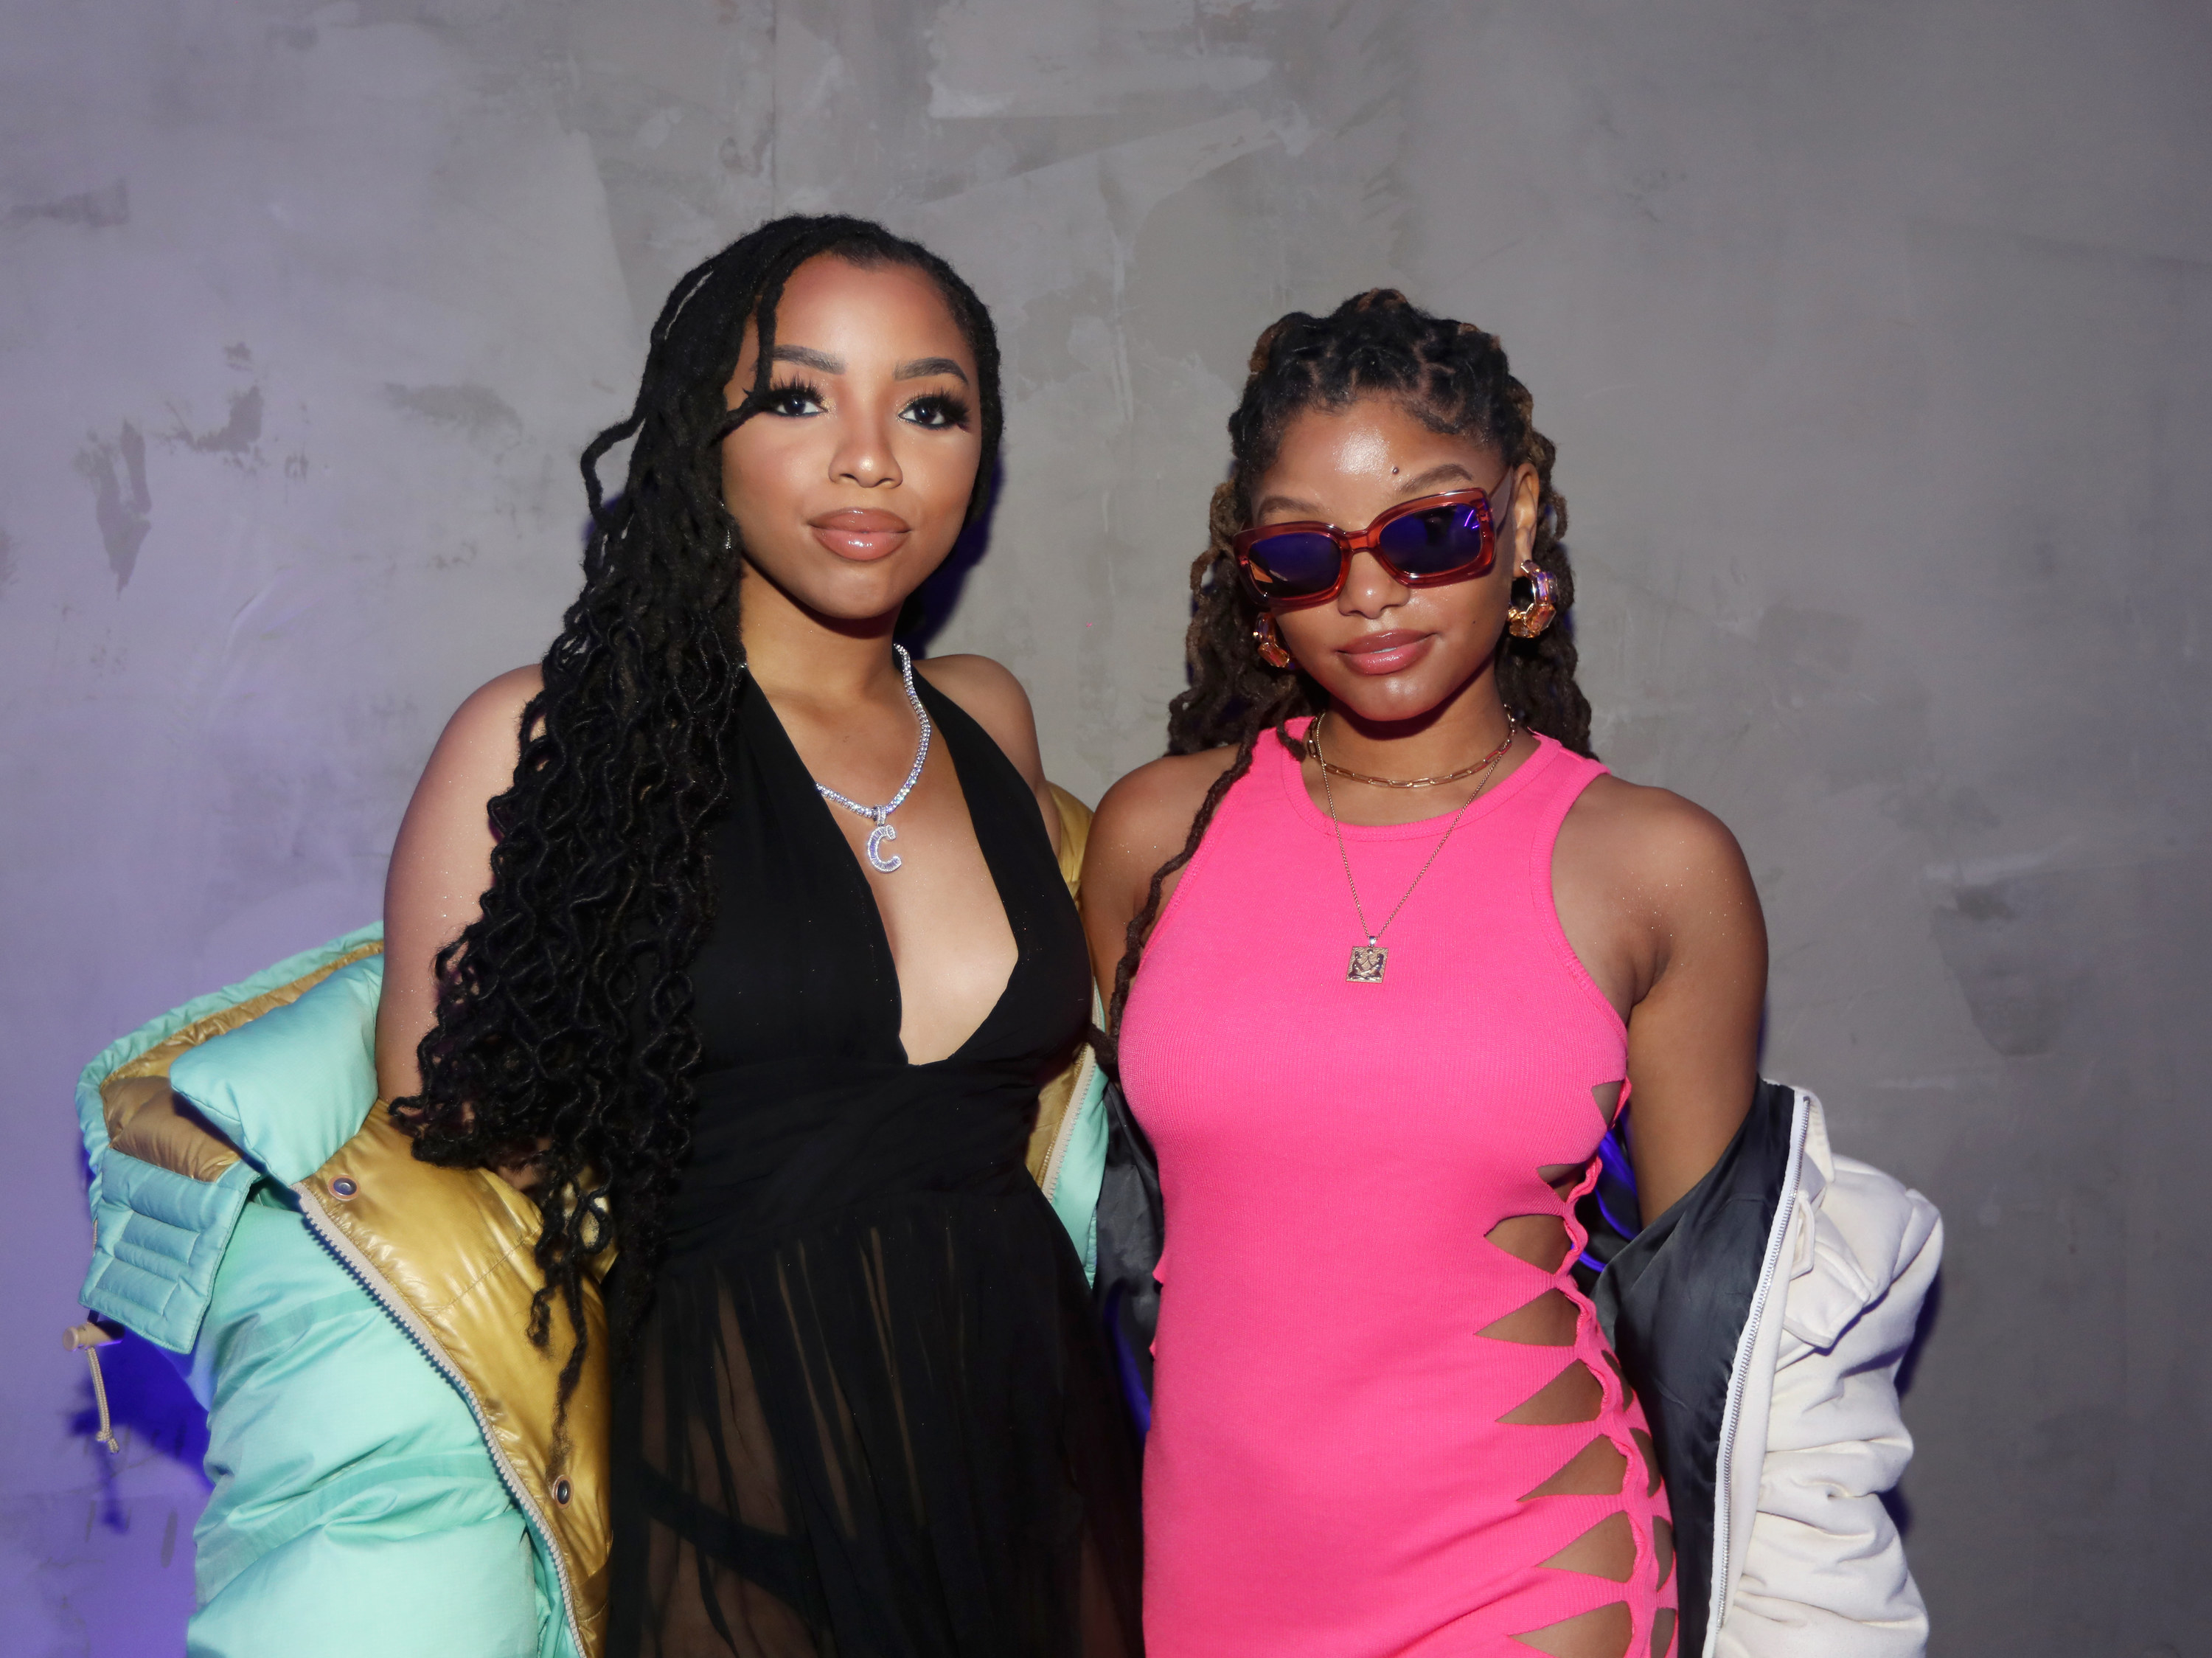 Chloe and Halle pose for a picture arm-in-arm